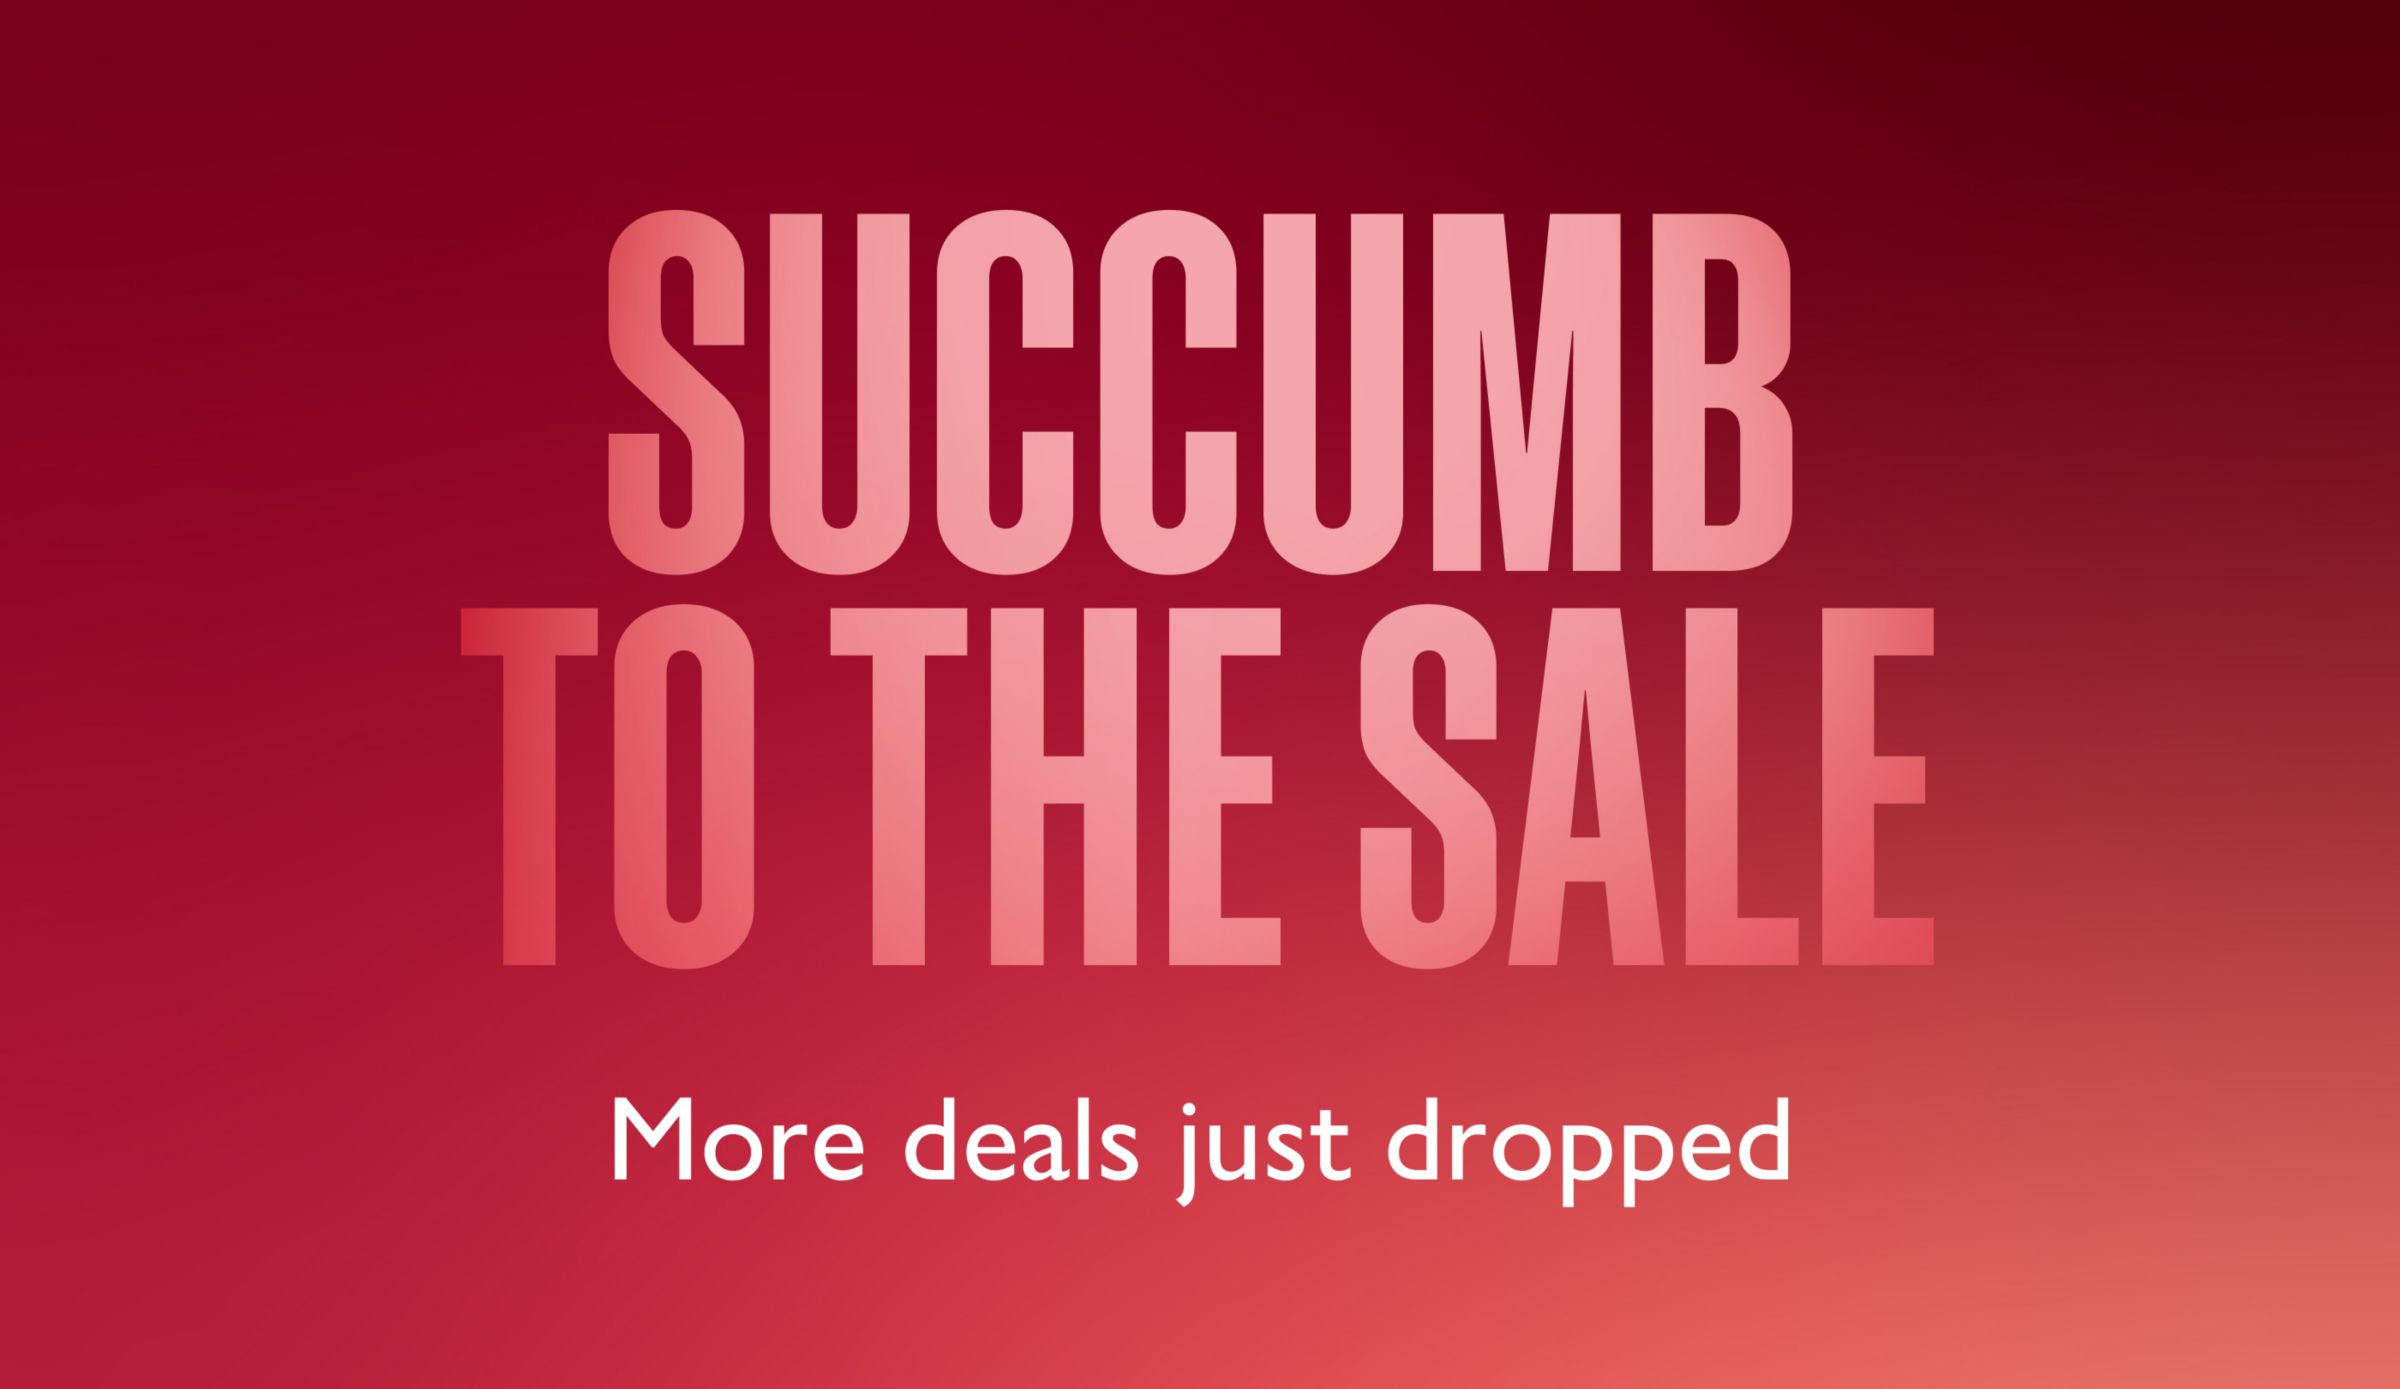 SUCCUMB TO THE SALE  More deals just dropped